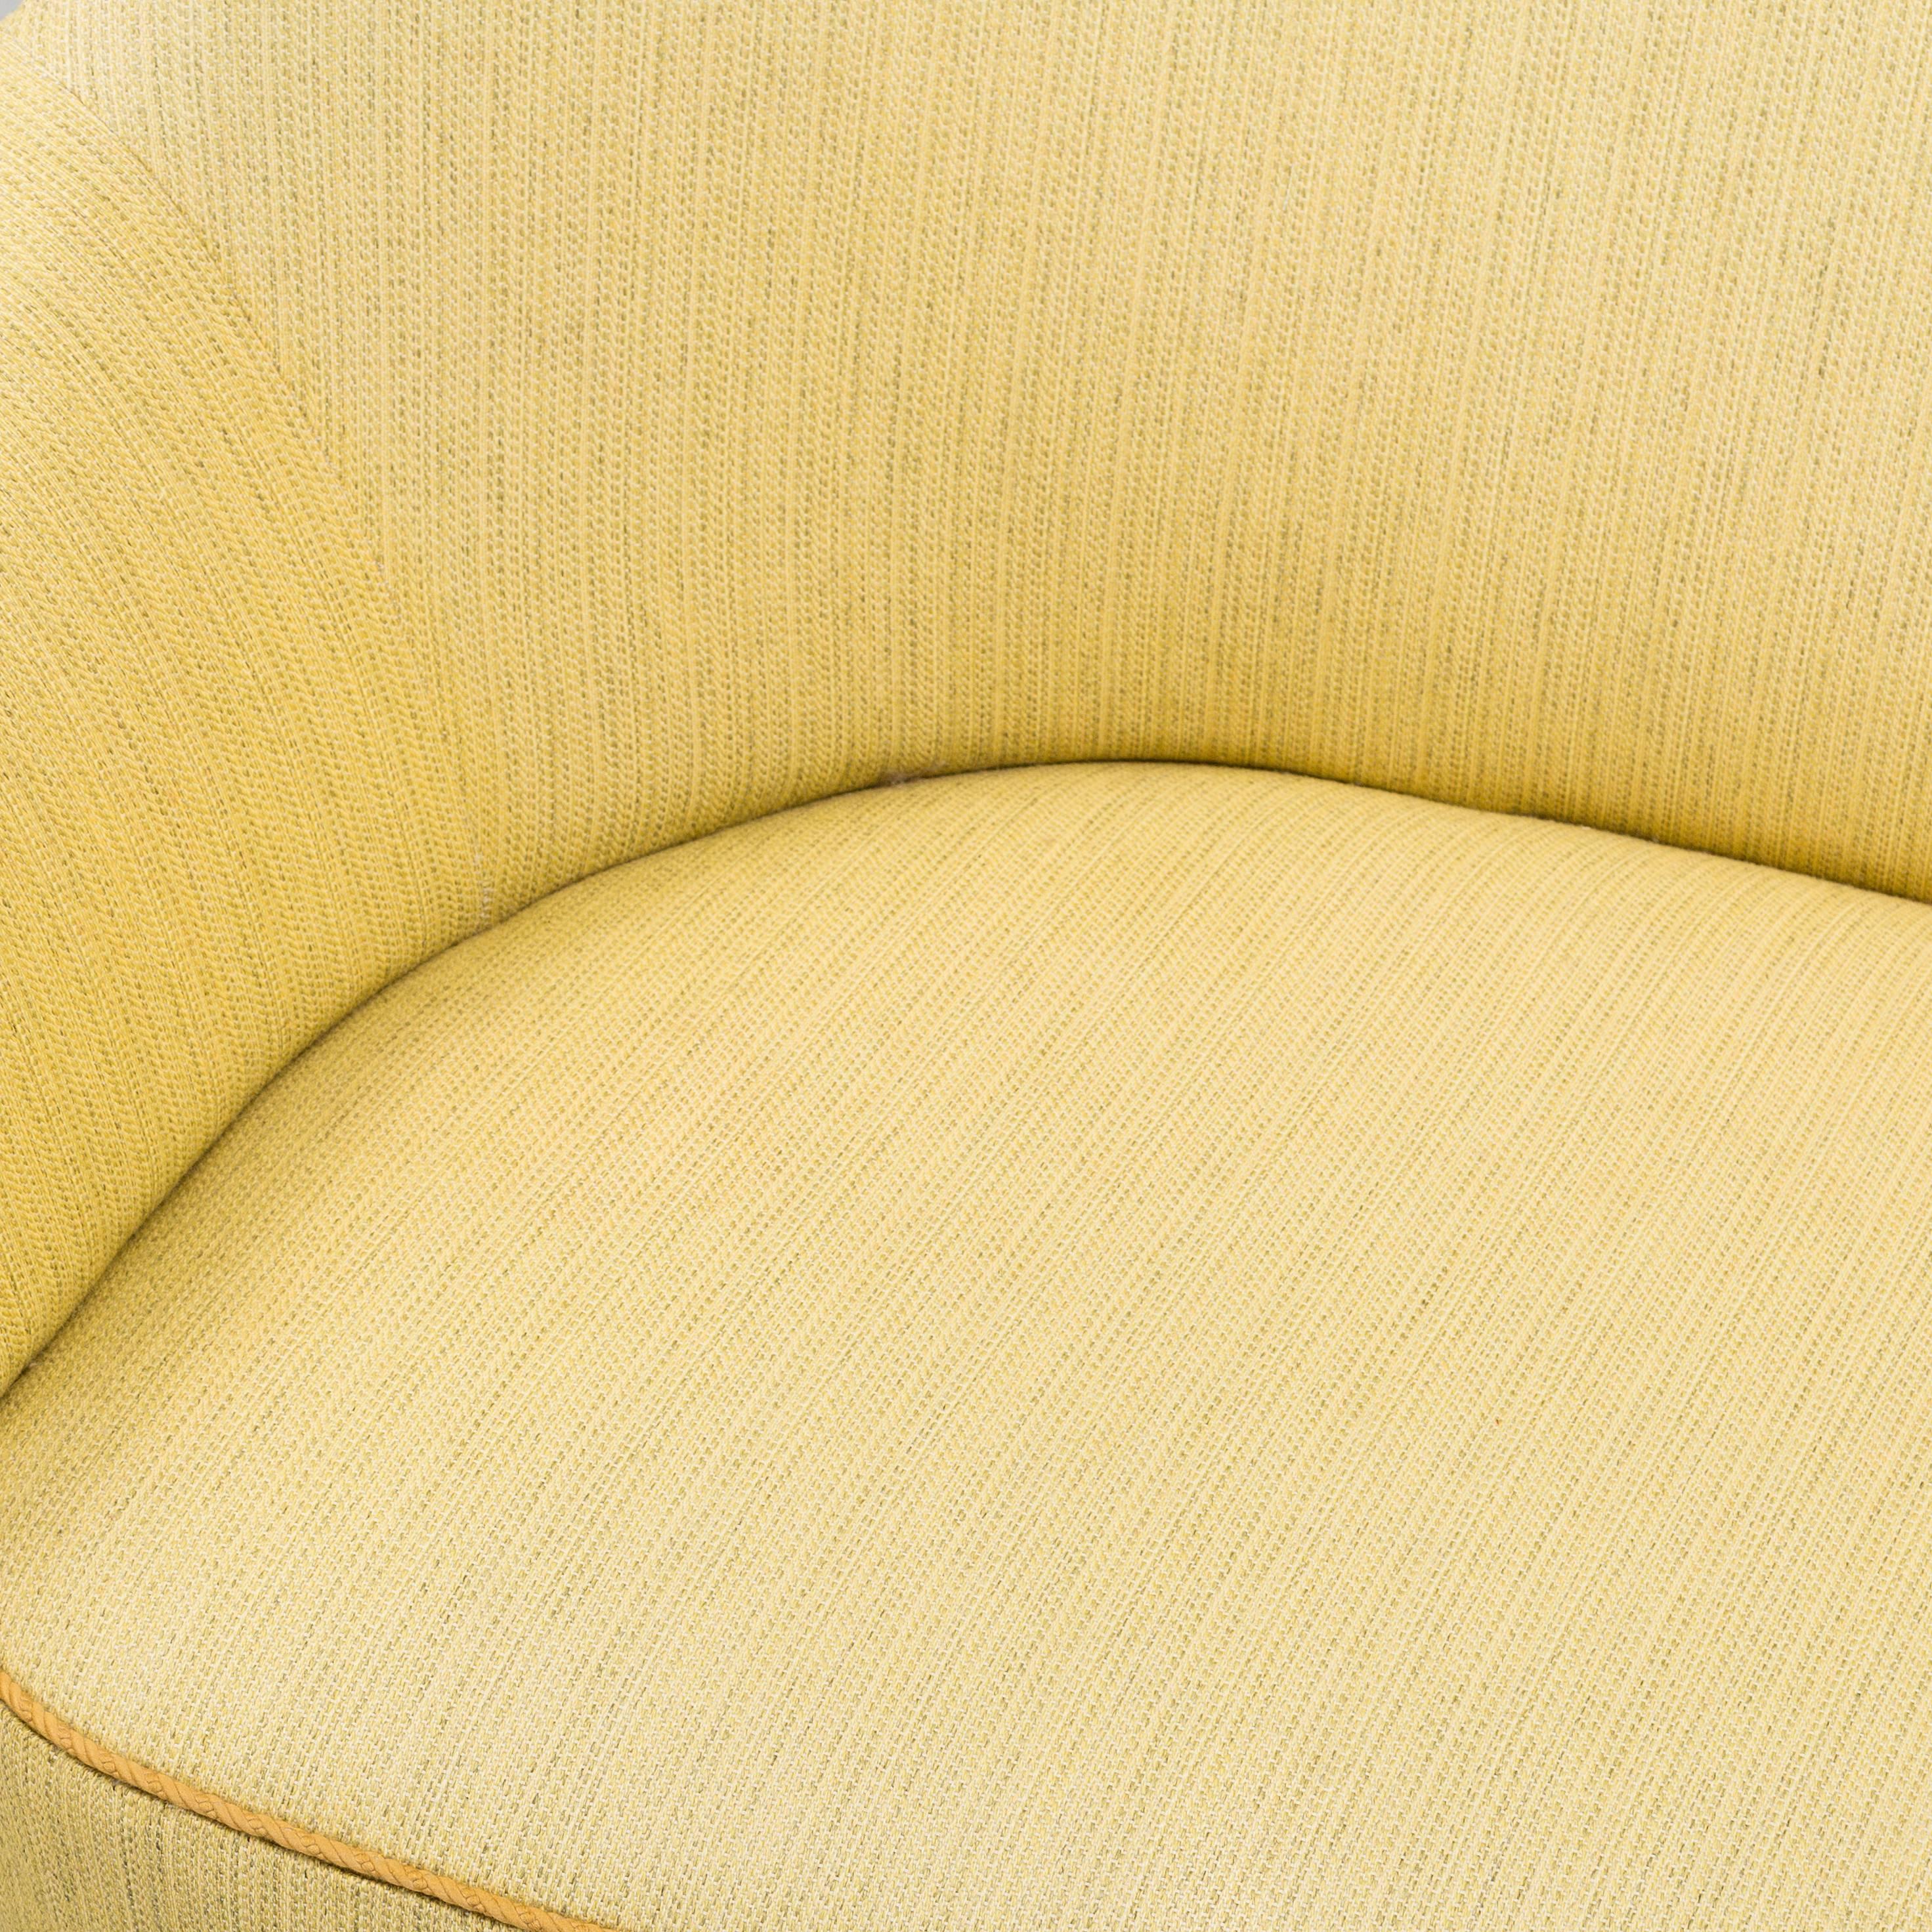 Carl Malmsten Yellow Mid 20th Century Samspel Sofa / Loveseat, produced by O.H. Sjogren, Sweden.    Very good original condition.   Other fabric options and a reupholstery service are available.   Ships worldwide - please contact us for options.